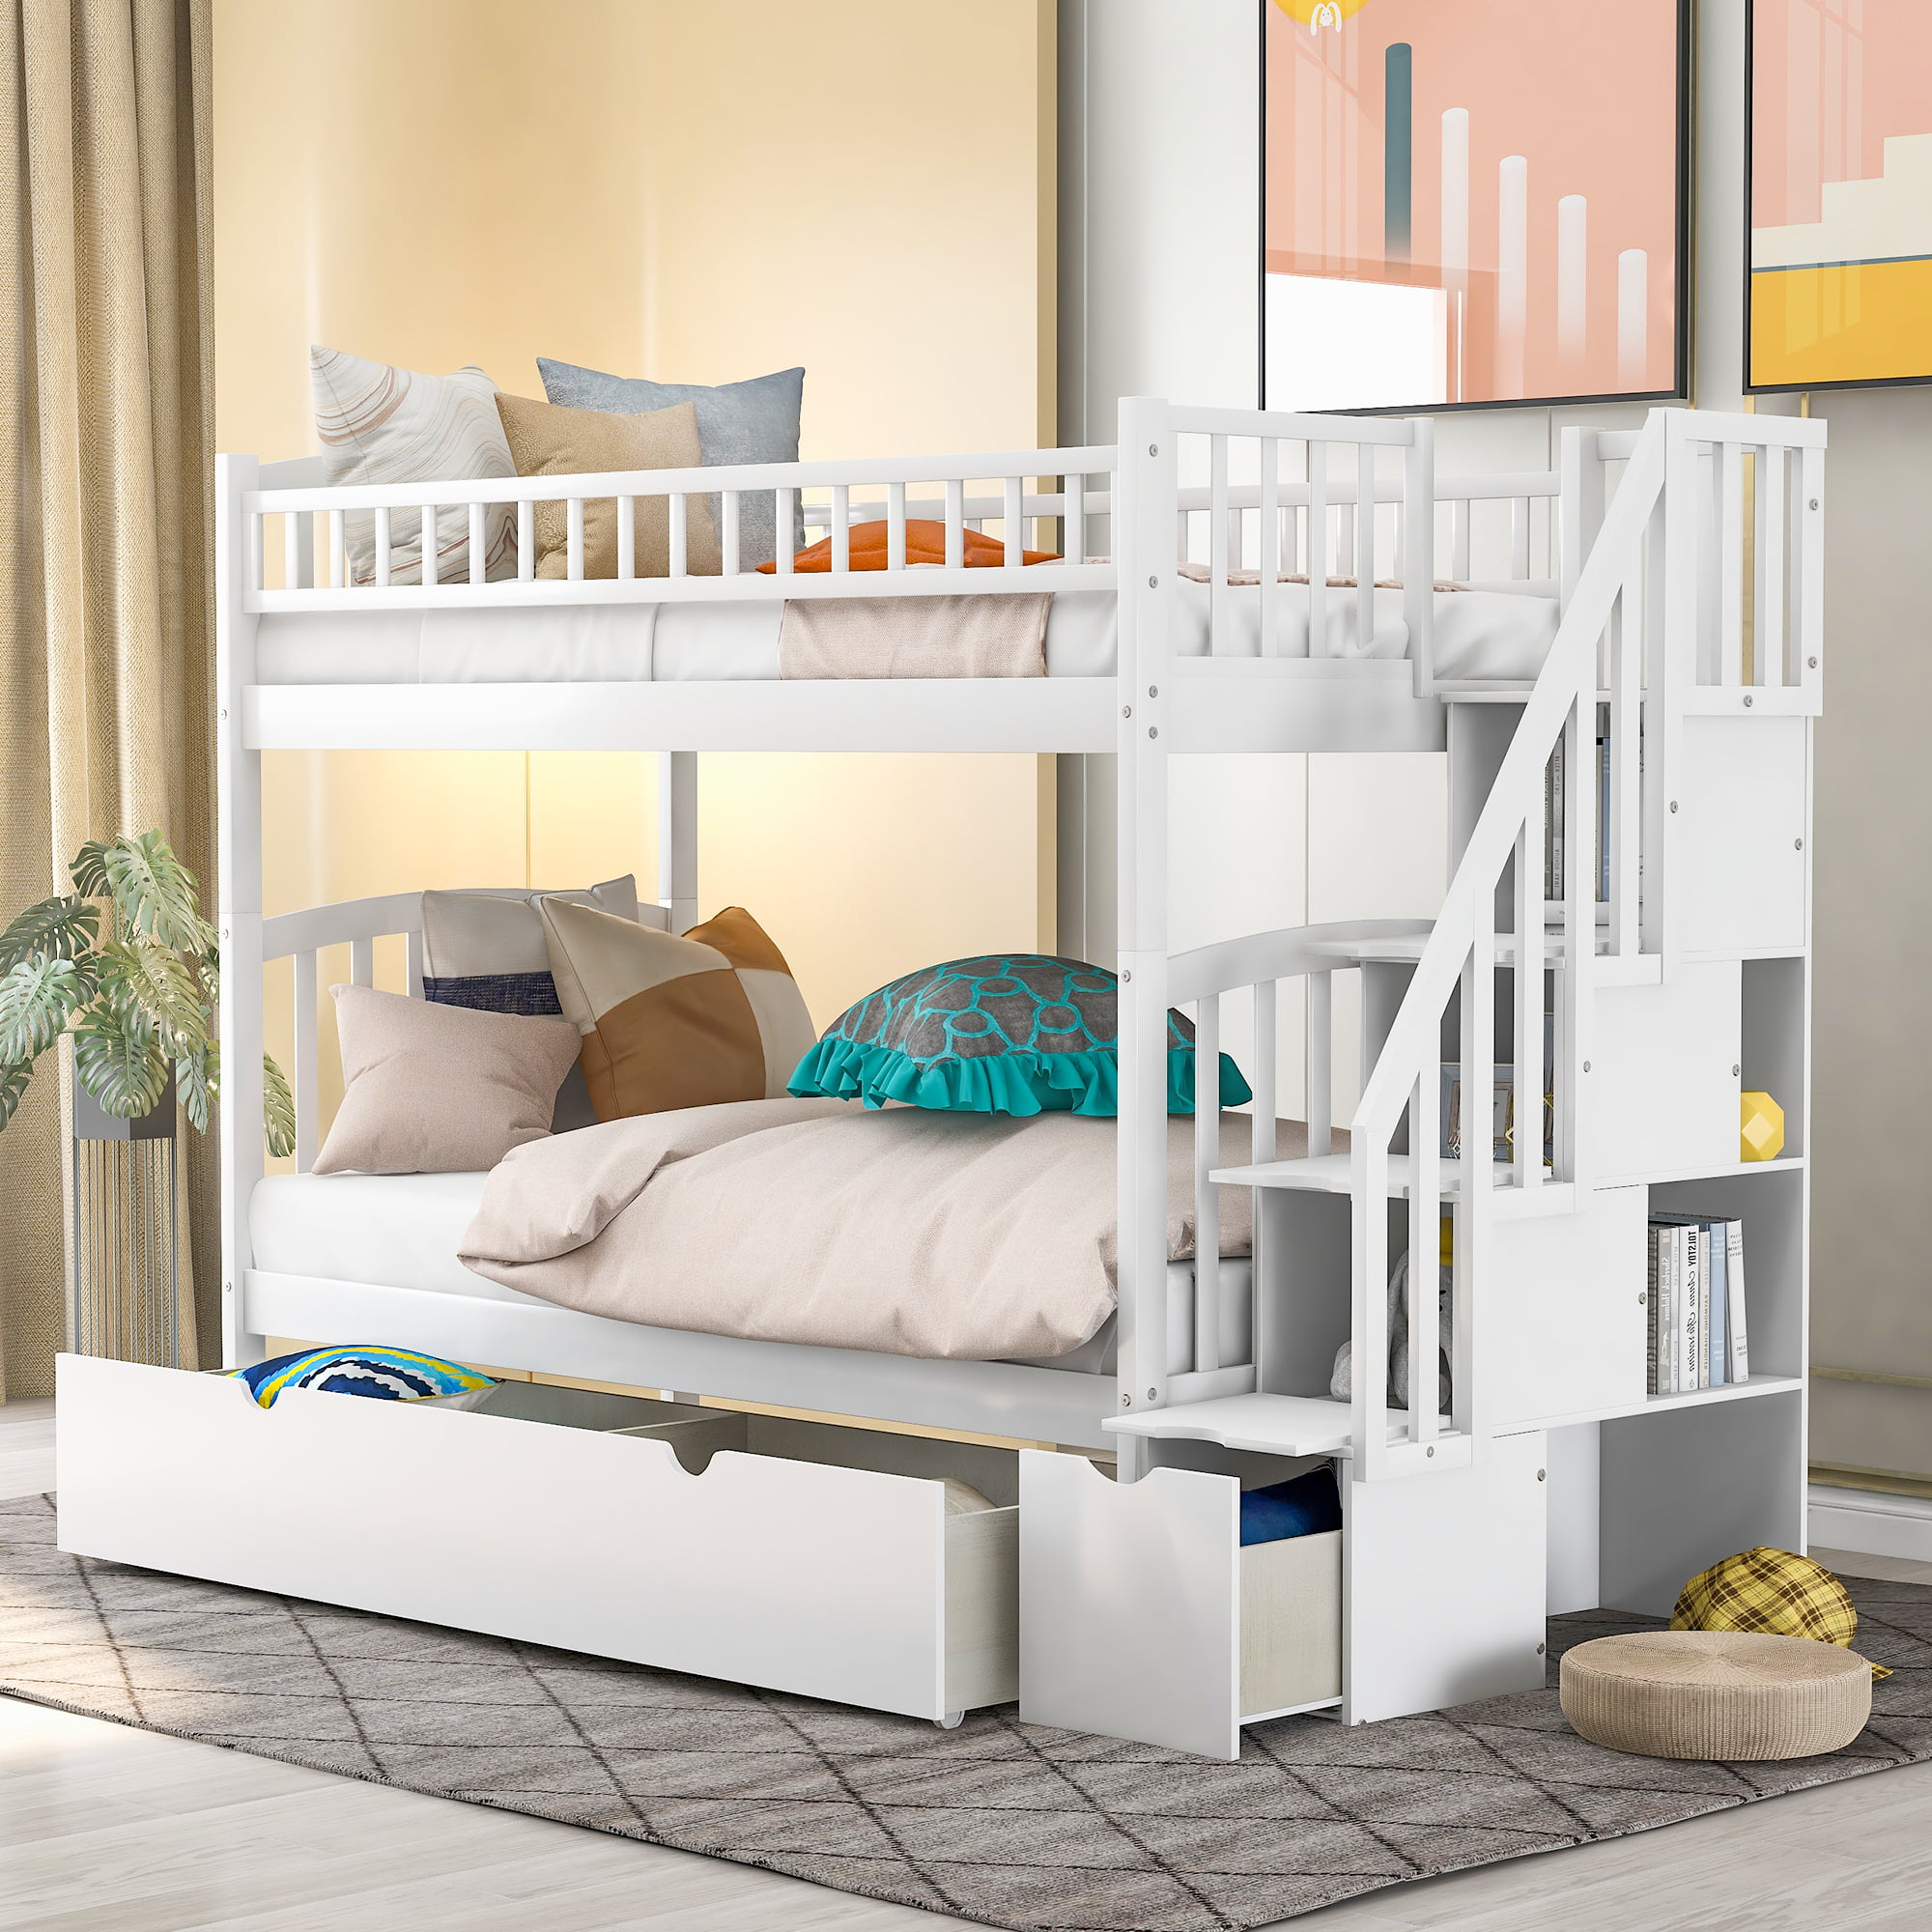 Loft Beds 2021 Upgraded Bunk Bed Twin, Loft Bed That Can Hold 300 Lbs